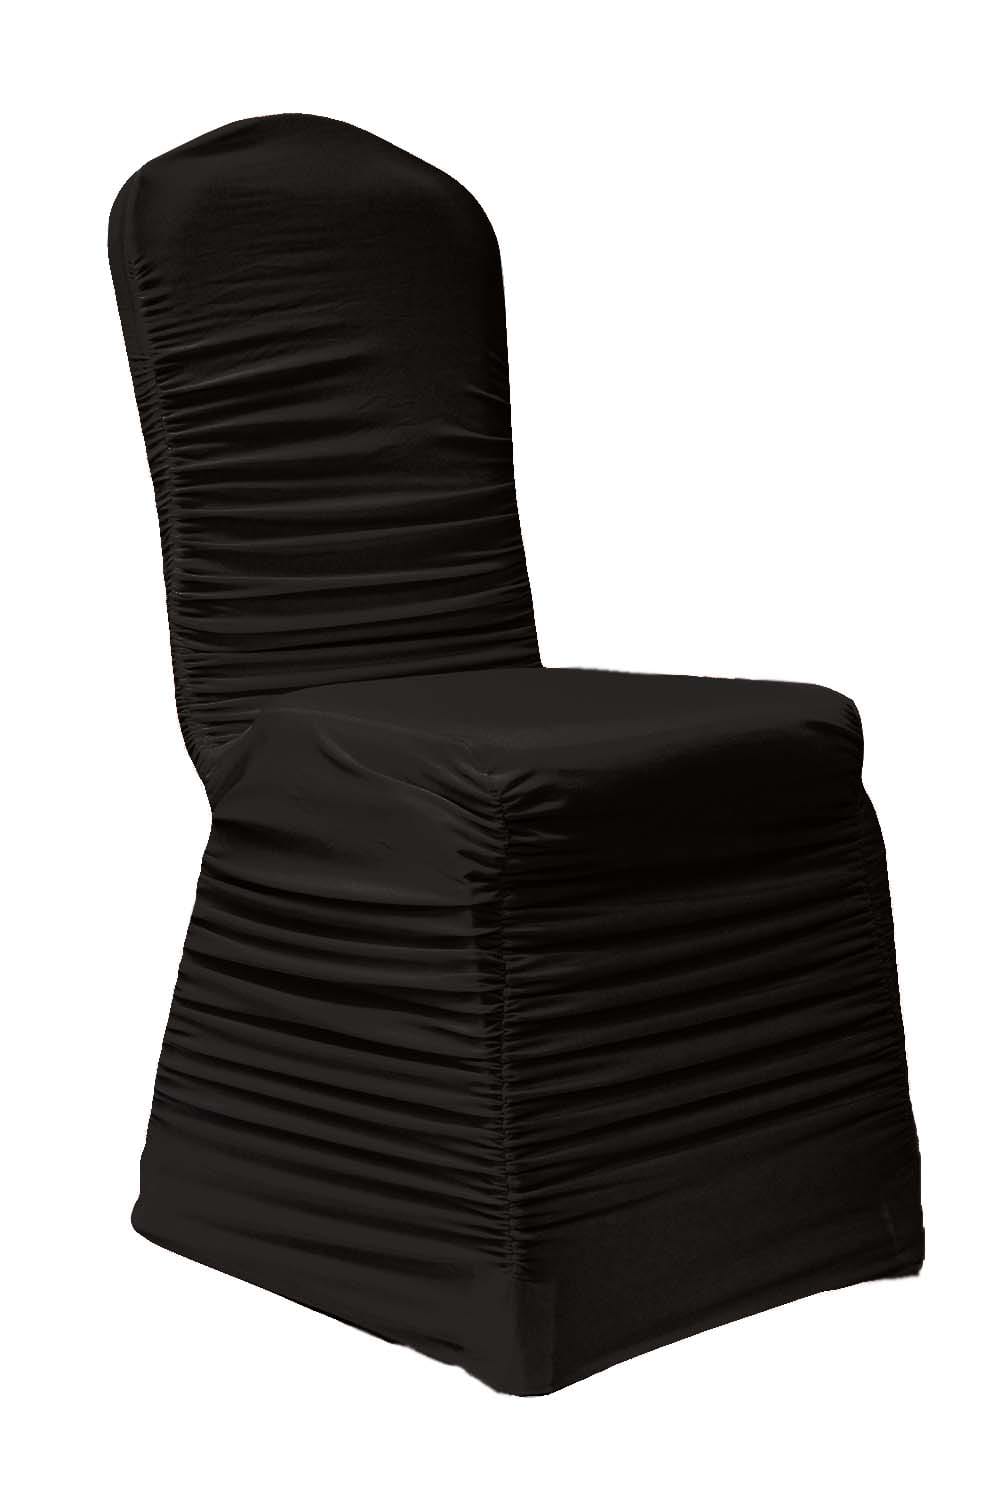 Wholesale Spandex Chair covers